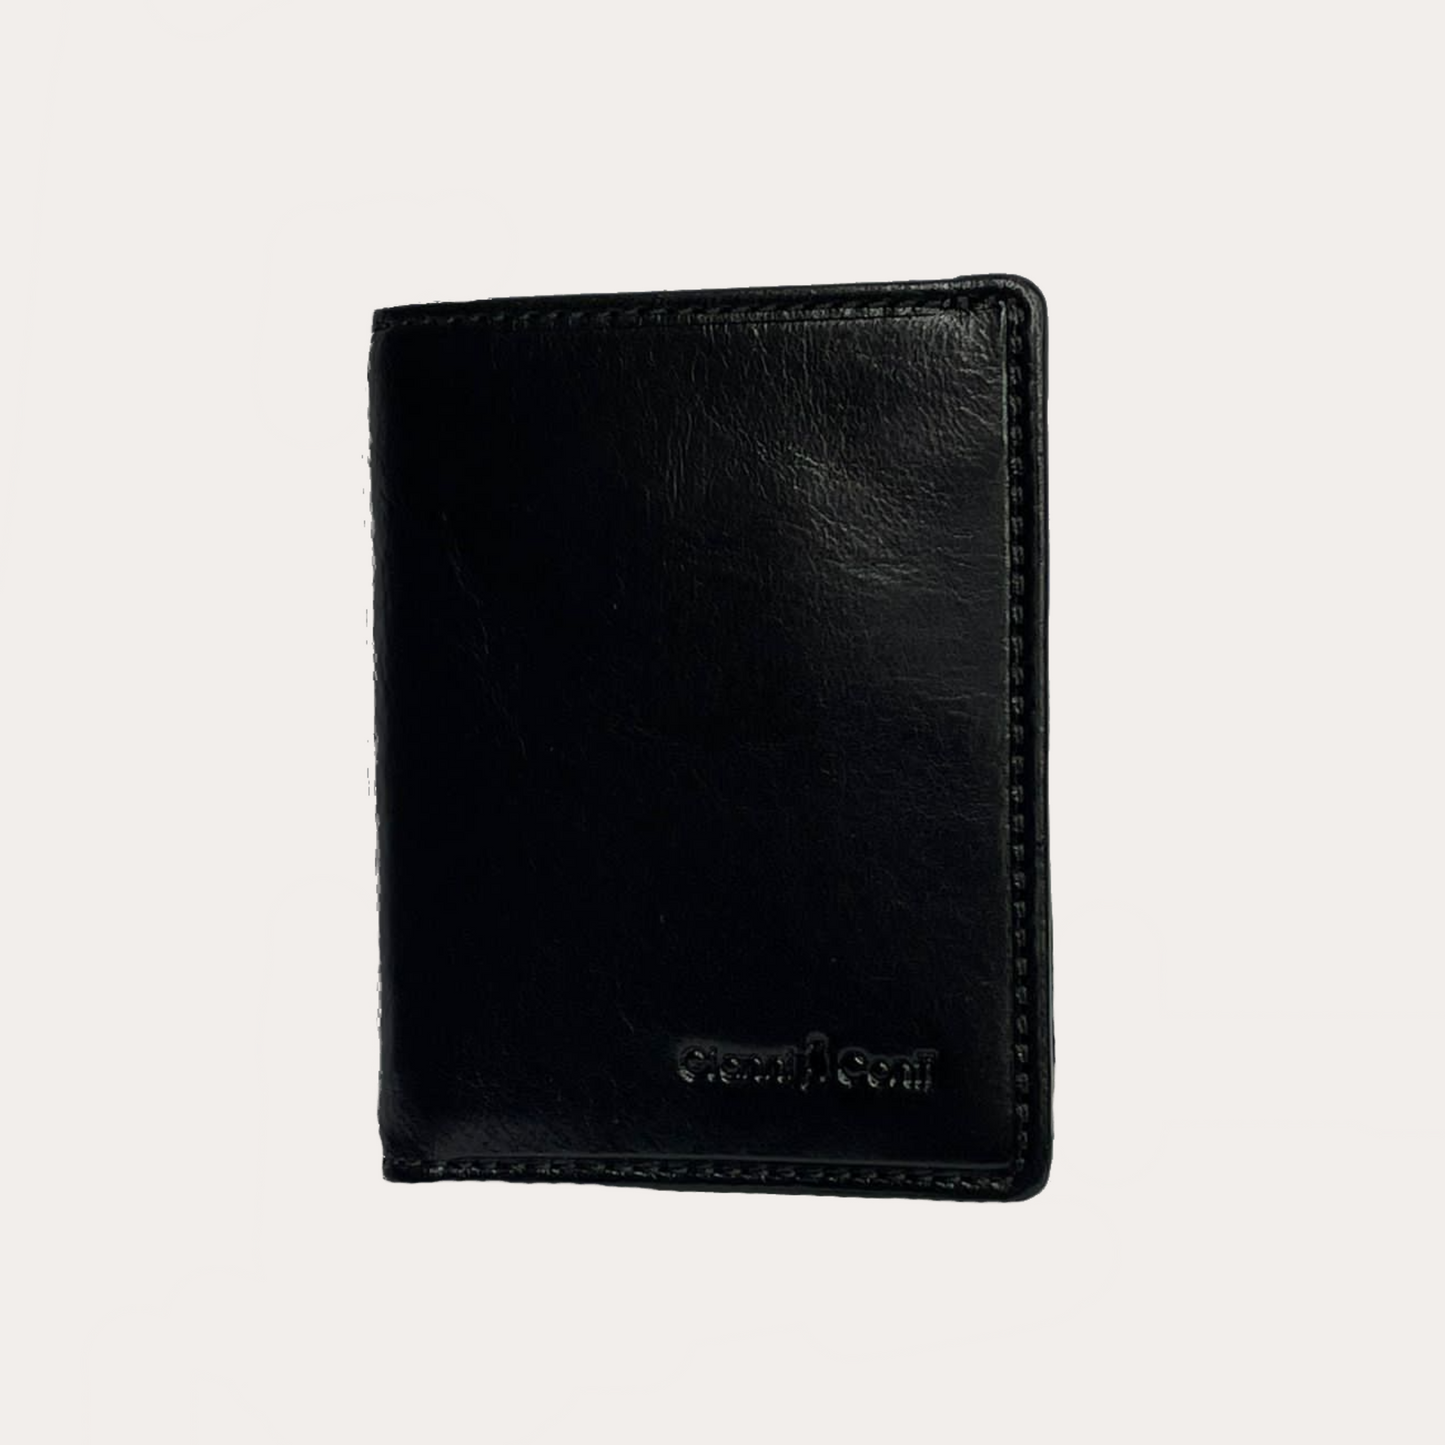 Gianni Conti Black Leather Wallet-8 credit card sections